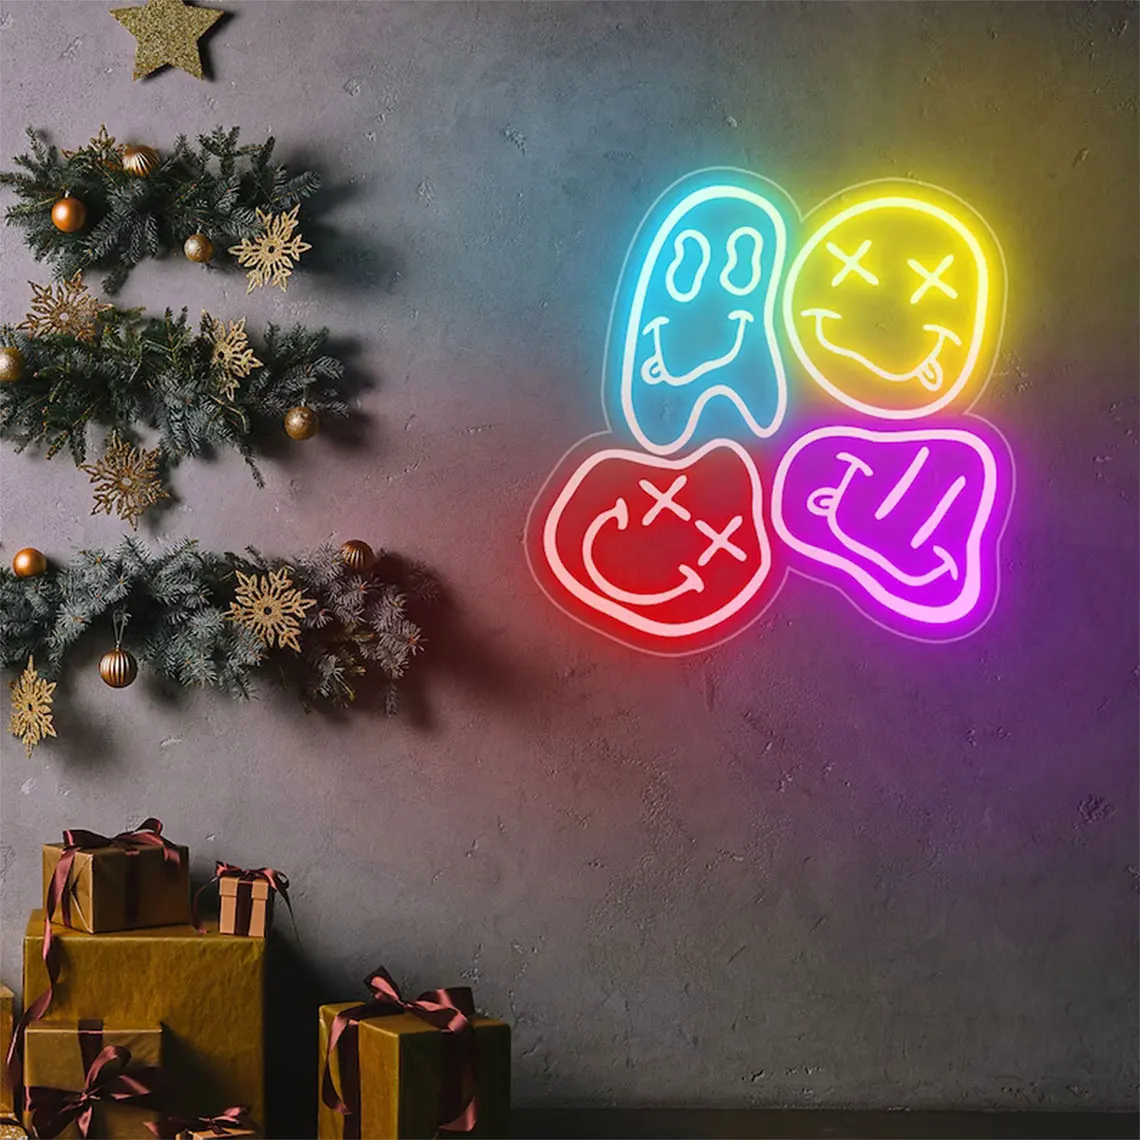 

Distorted Smile Face Neon Led Sign Custom Multi Colors Home Decor Smiley Led Wall Light Art Birthday Party Event Kids Lamp